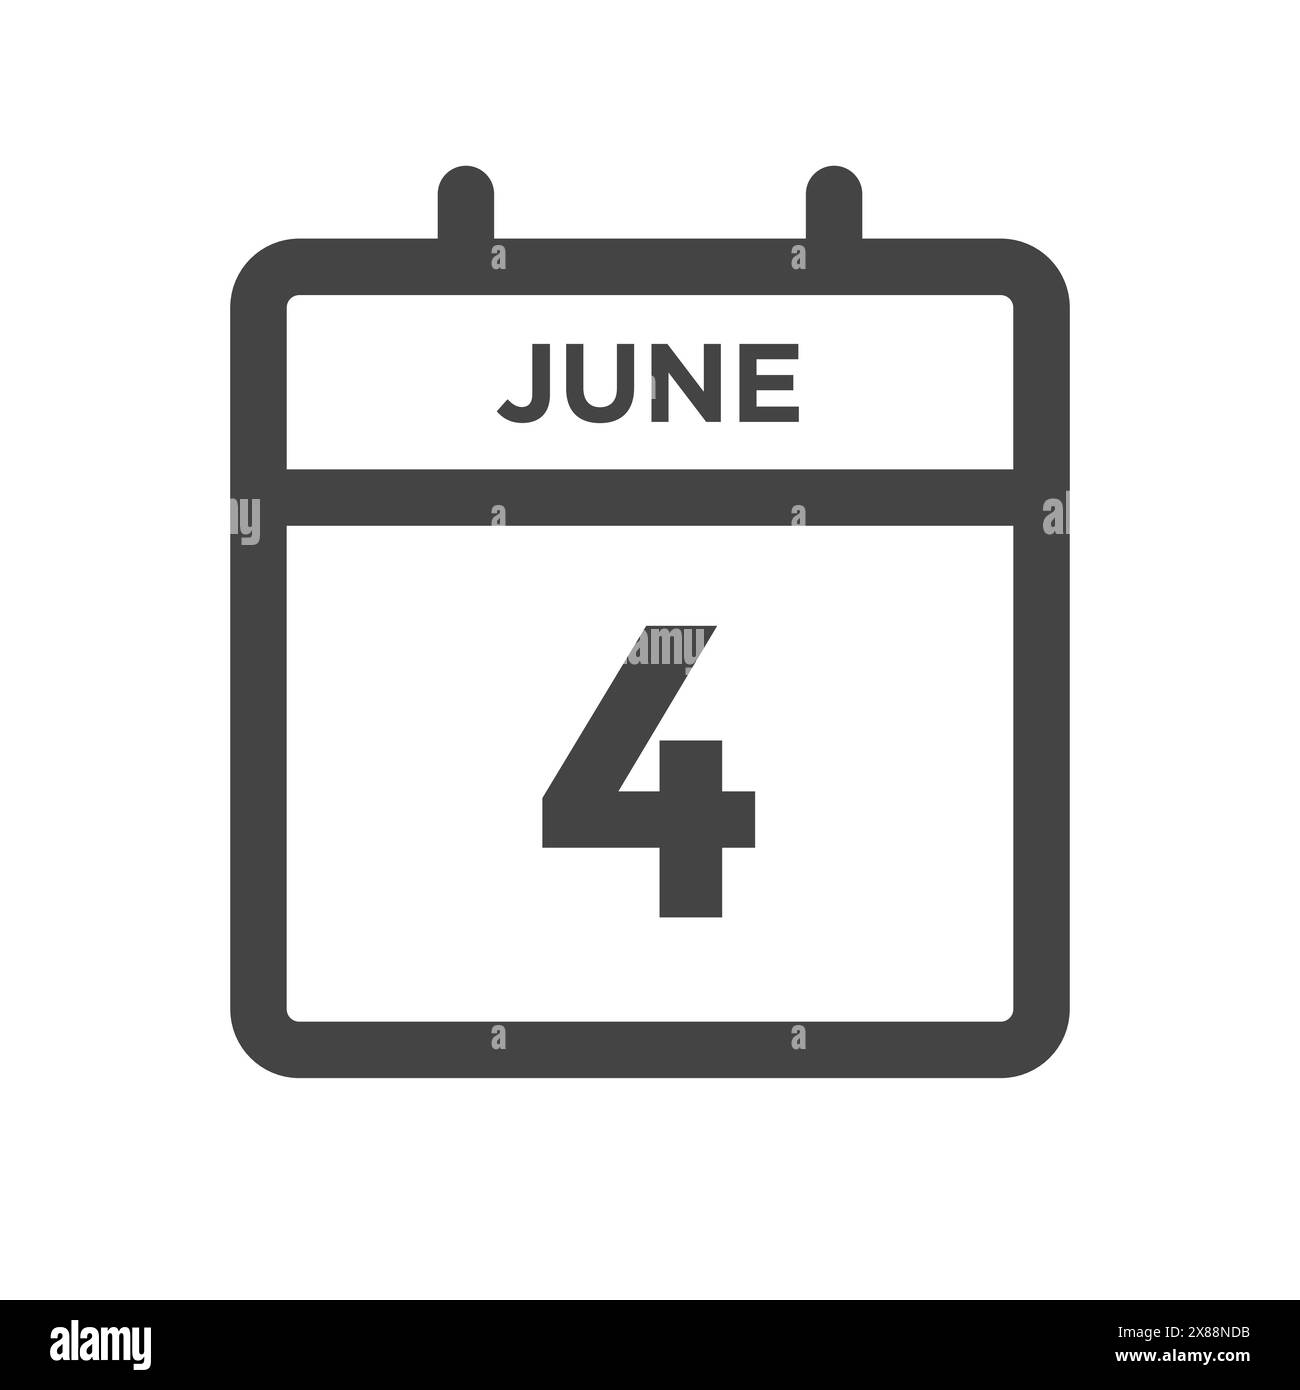 June 4 Calendar Day or Calender Date for Deadline and Appointment Stock Vector